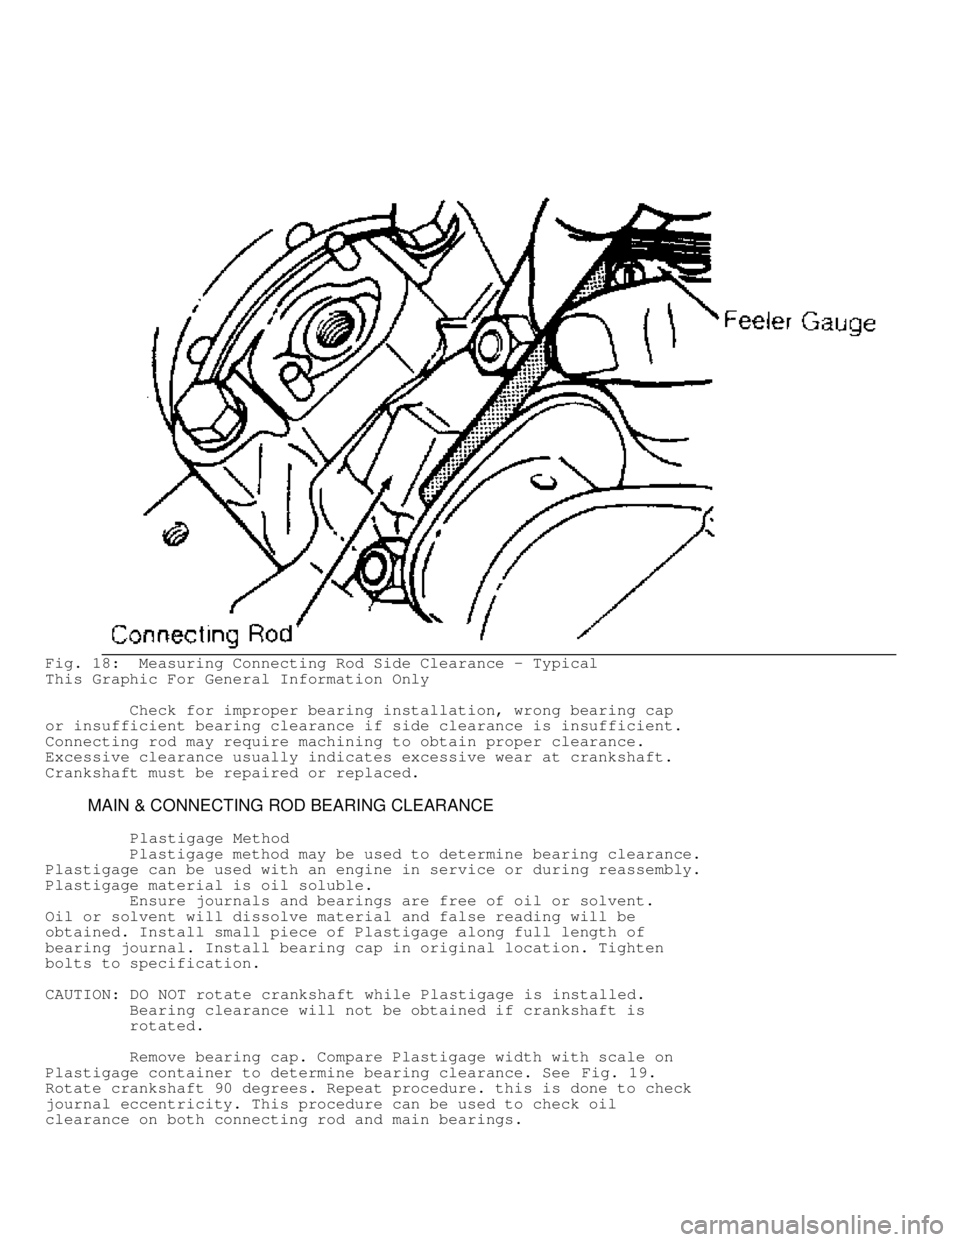 JEEP CHEROKEE 1988  Service Repair Manual Fig. 18:  Measuring Connecting Rod Side Clearance - Typical
This Graphic For General Information Only
         Check for improper bearing installation, wrong bearing cap
or insufficient bearing cleara